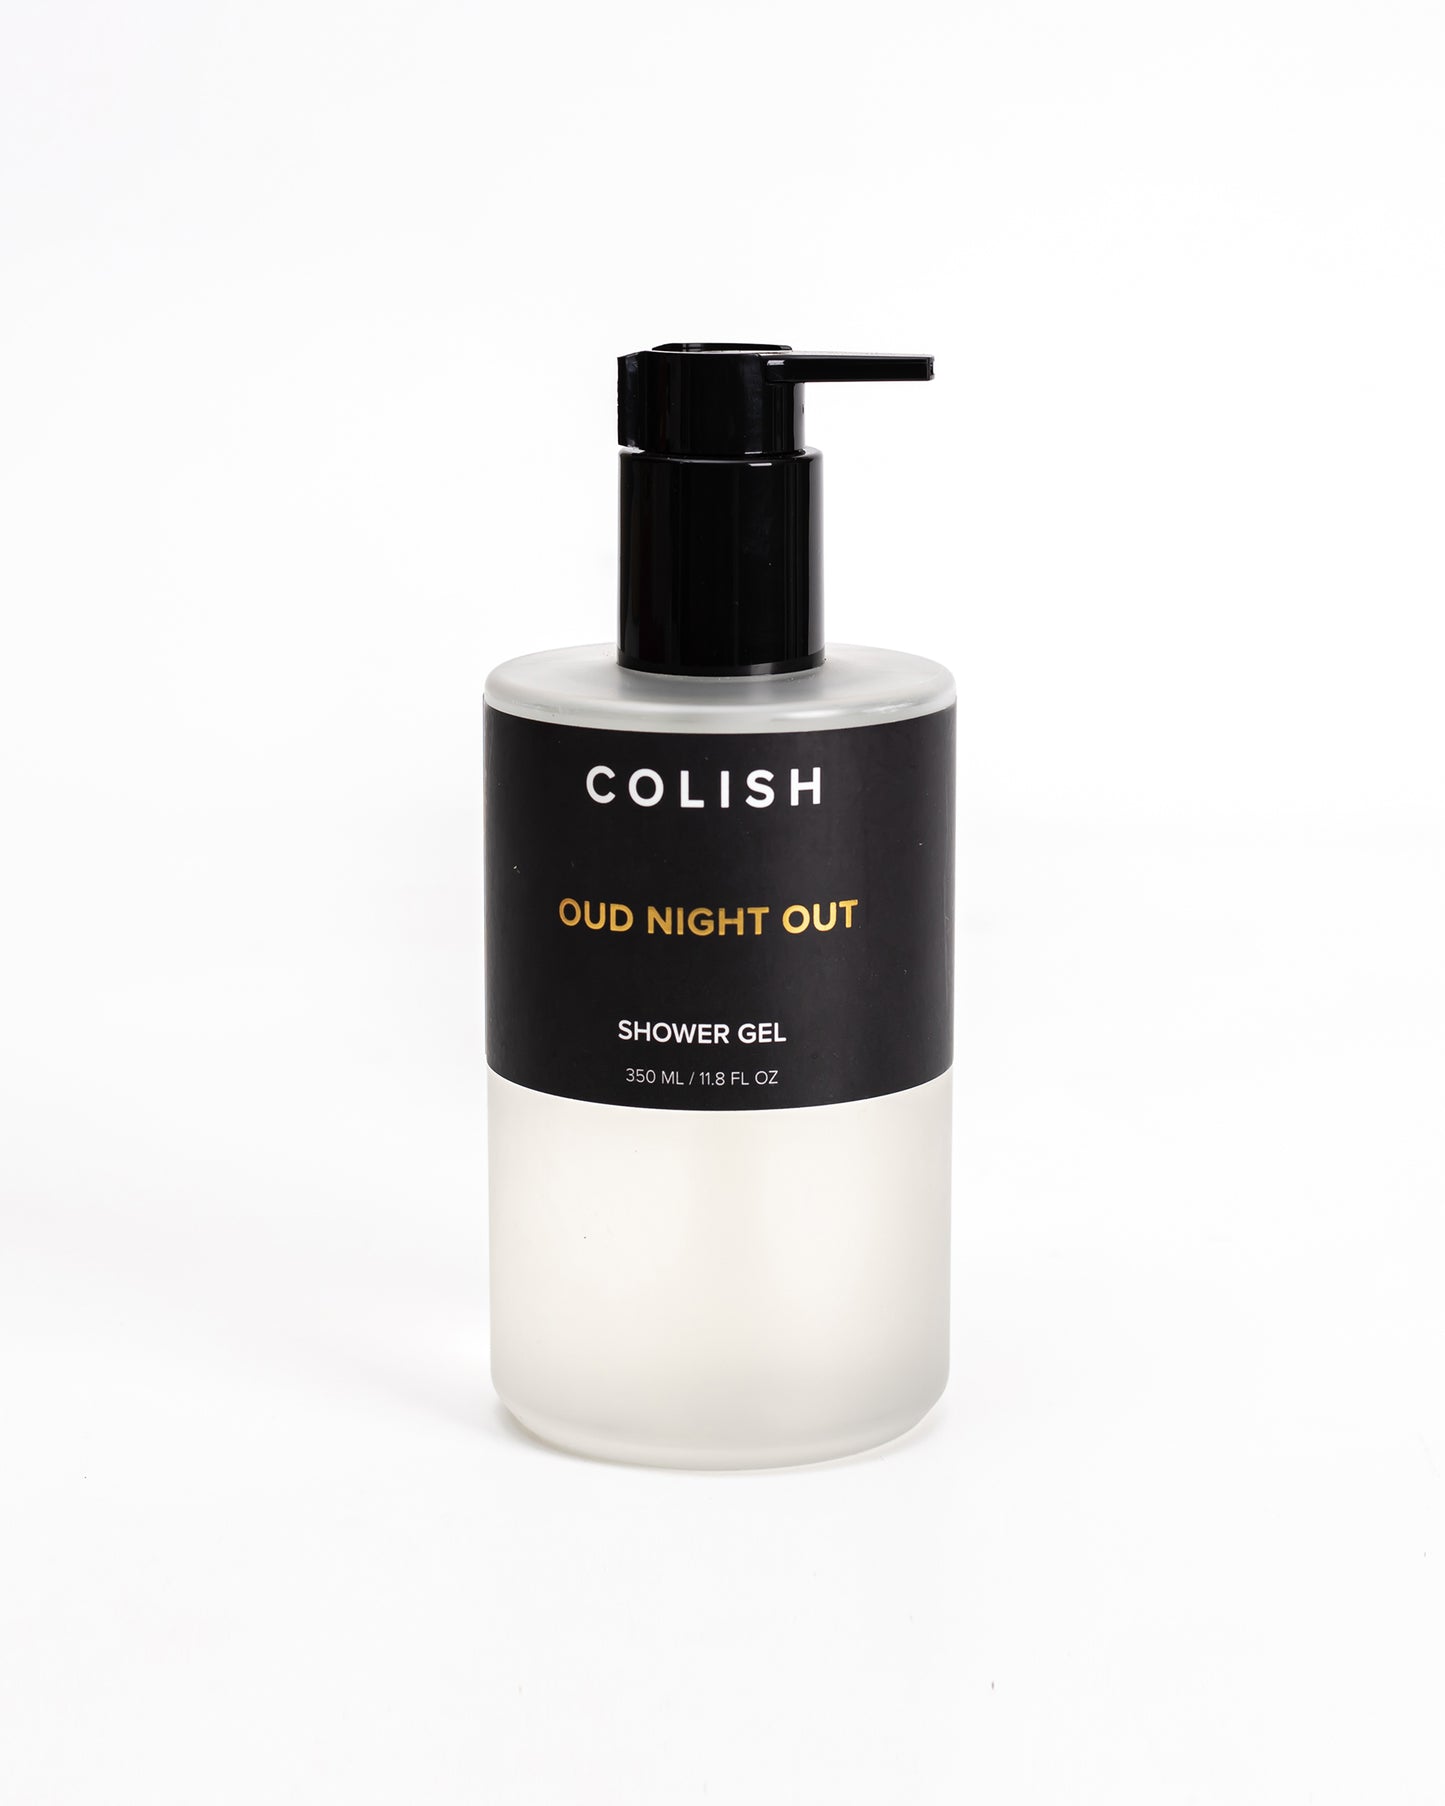 OUD NIGHT OUT SHOWER GEL